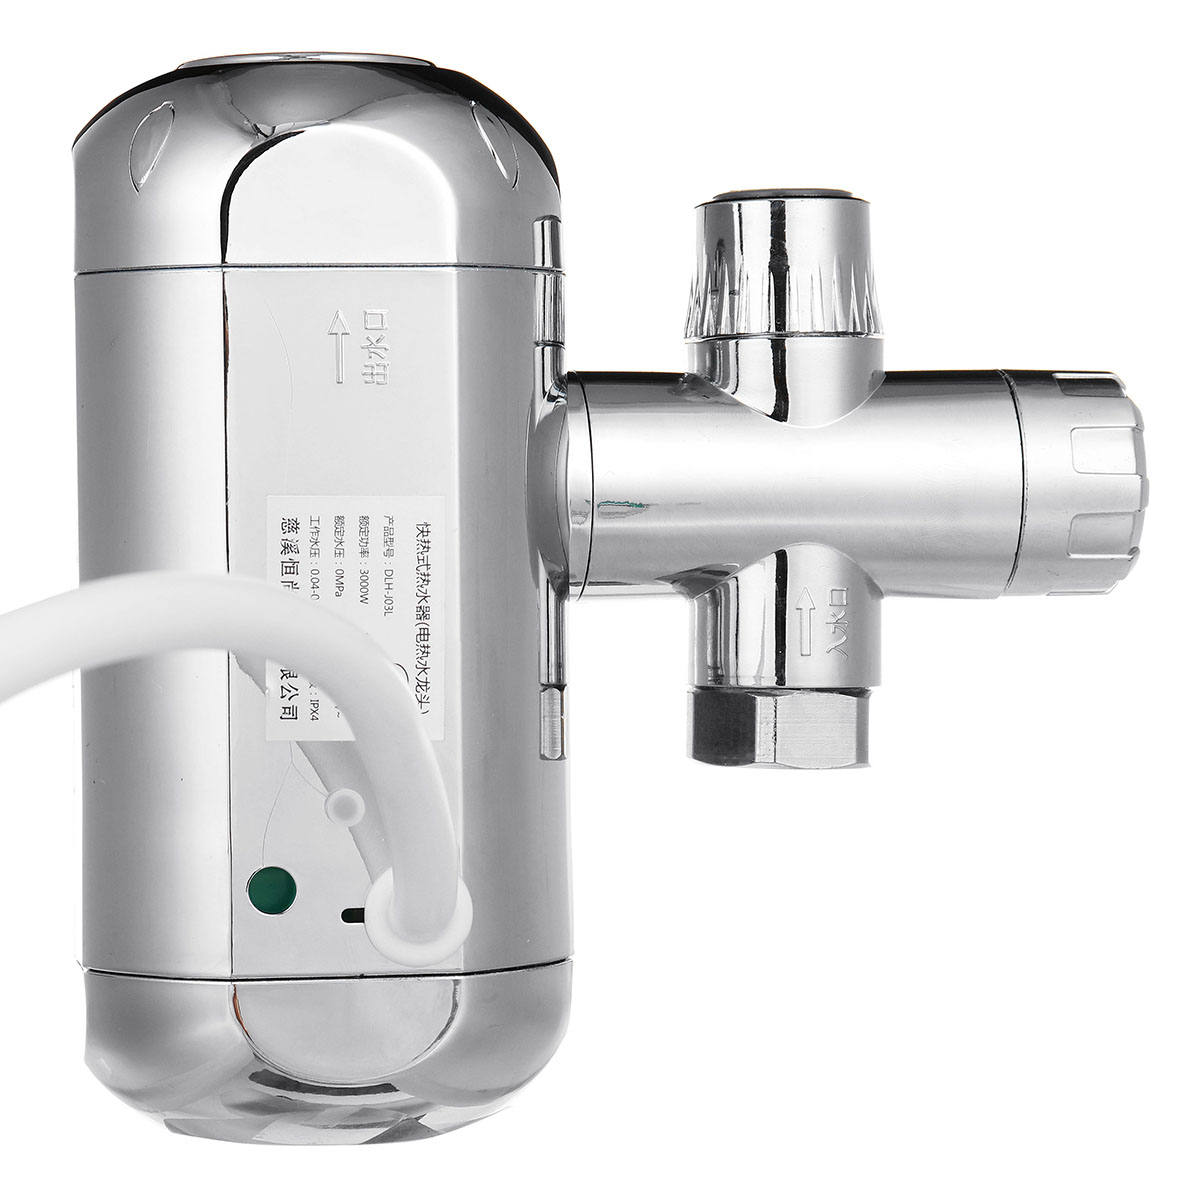 220V-3000W-Tankless-Electric-Water-Heater-Faucet-LCD-Display-3s-Instant-Heating-Tap-1403166